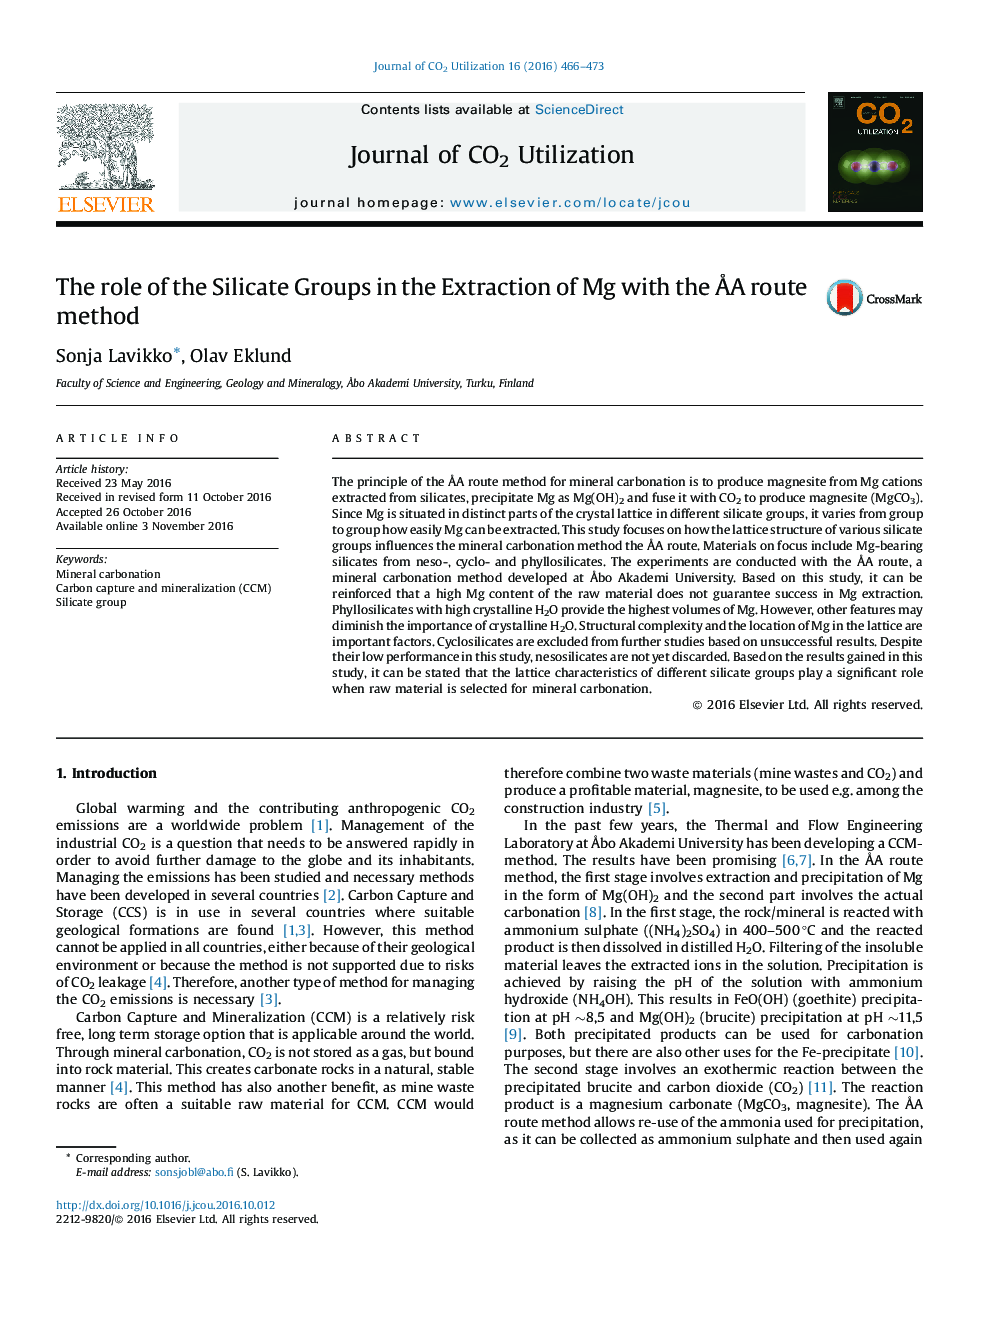 The role of the Silicate Groups in the Extraction of Mg with the ÃA route method